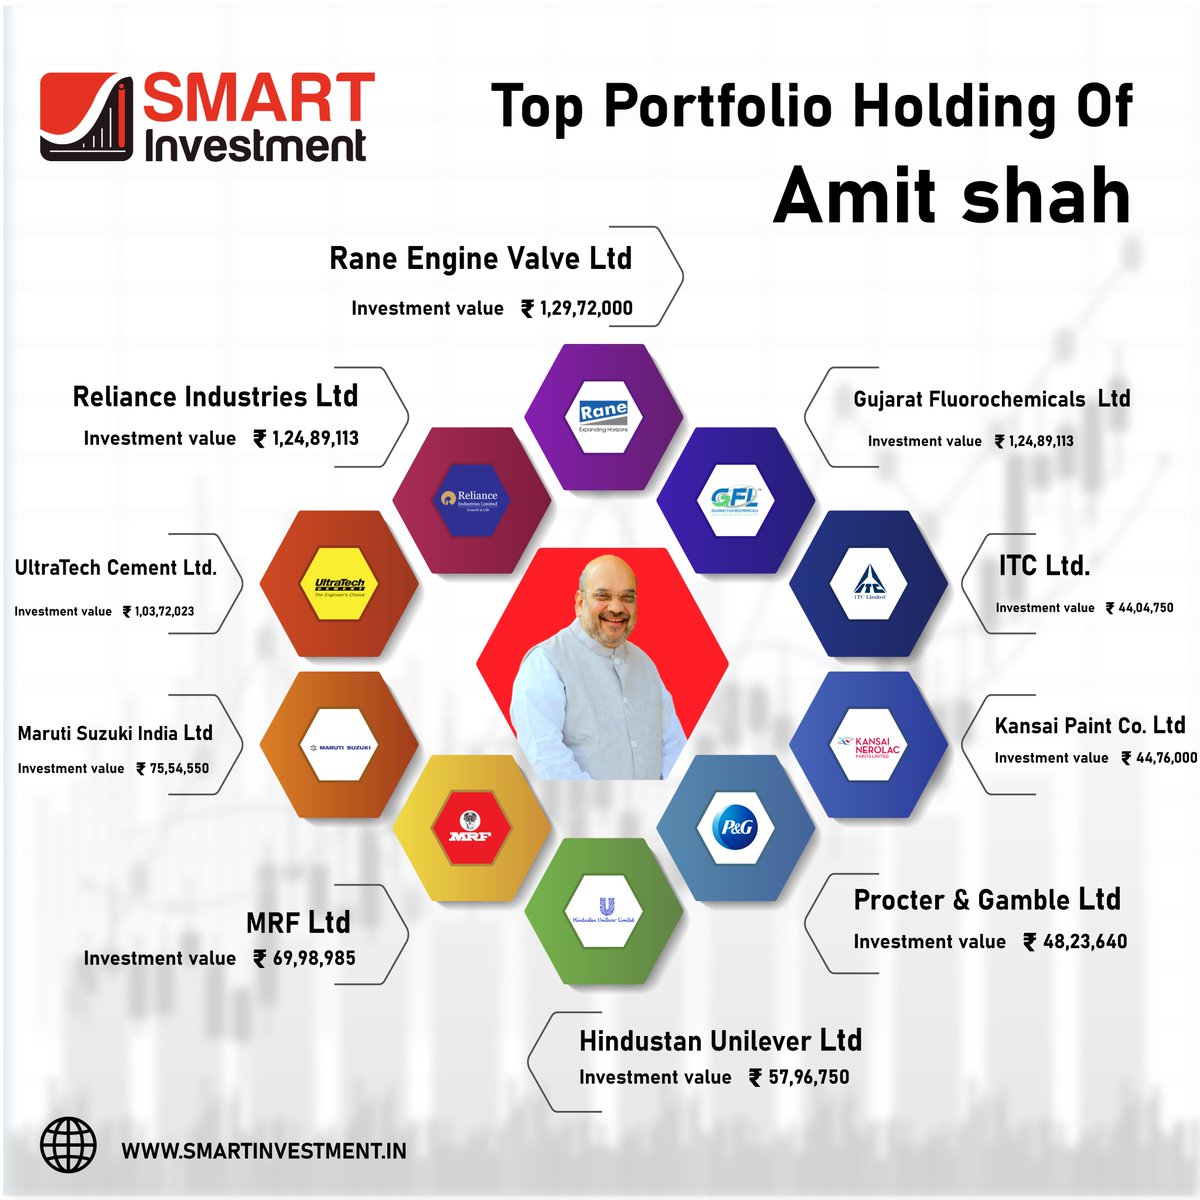 Top Portfolio Holdings of Amit shah
.
Follow For More
.
Visit Our Website
.
Download Our App
.
#sharemarket #investments #financial #analysis
#smartinvestment #financialnewspaper #stockmarket
#newspaper #news #resultimpact